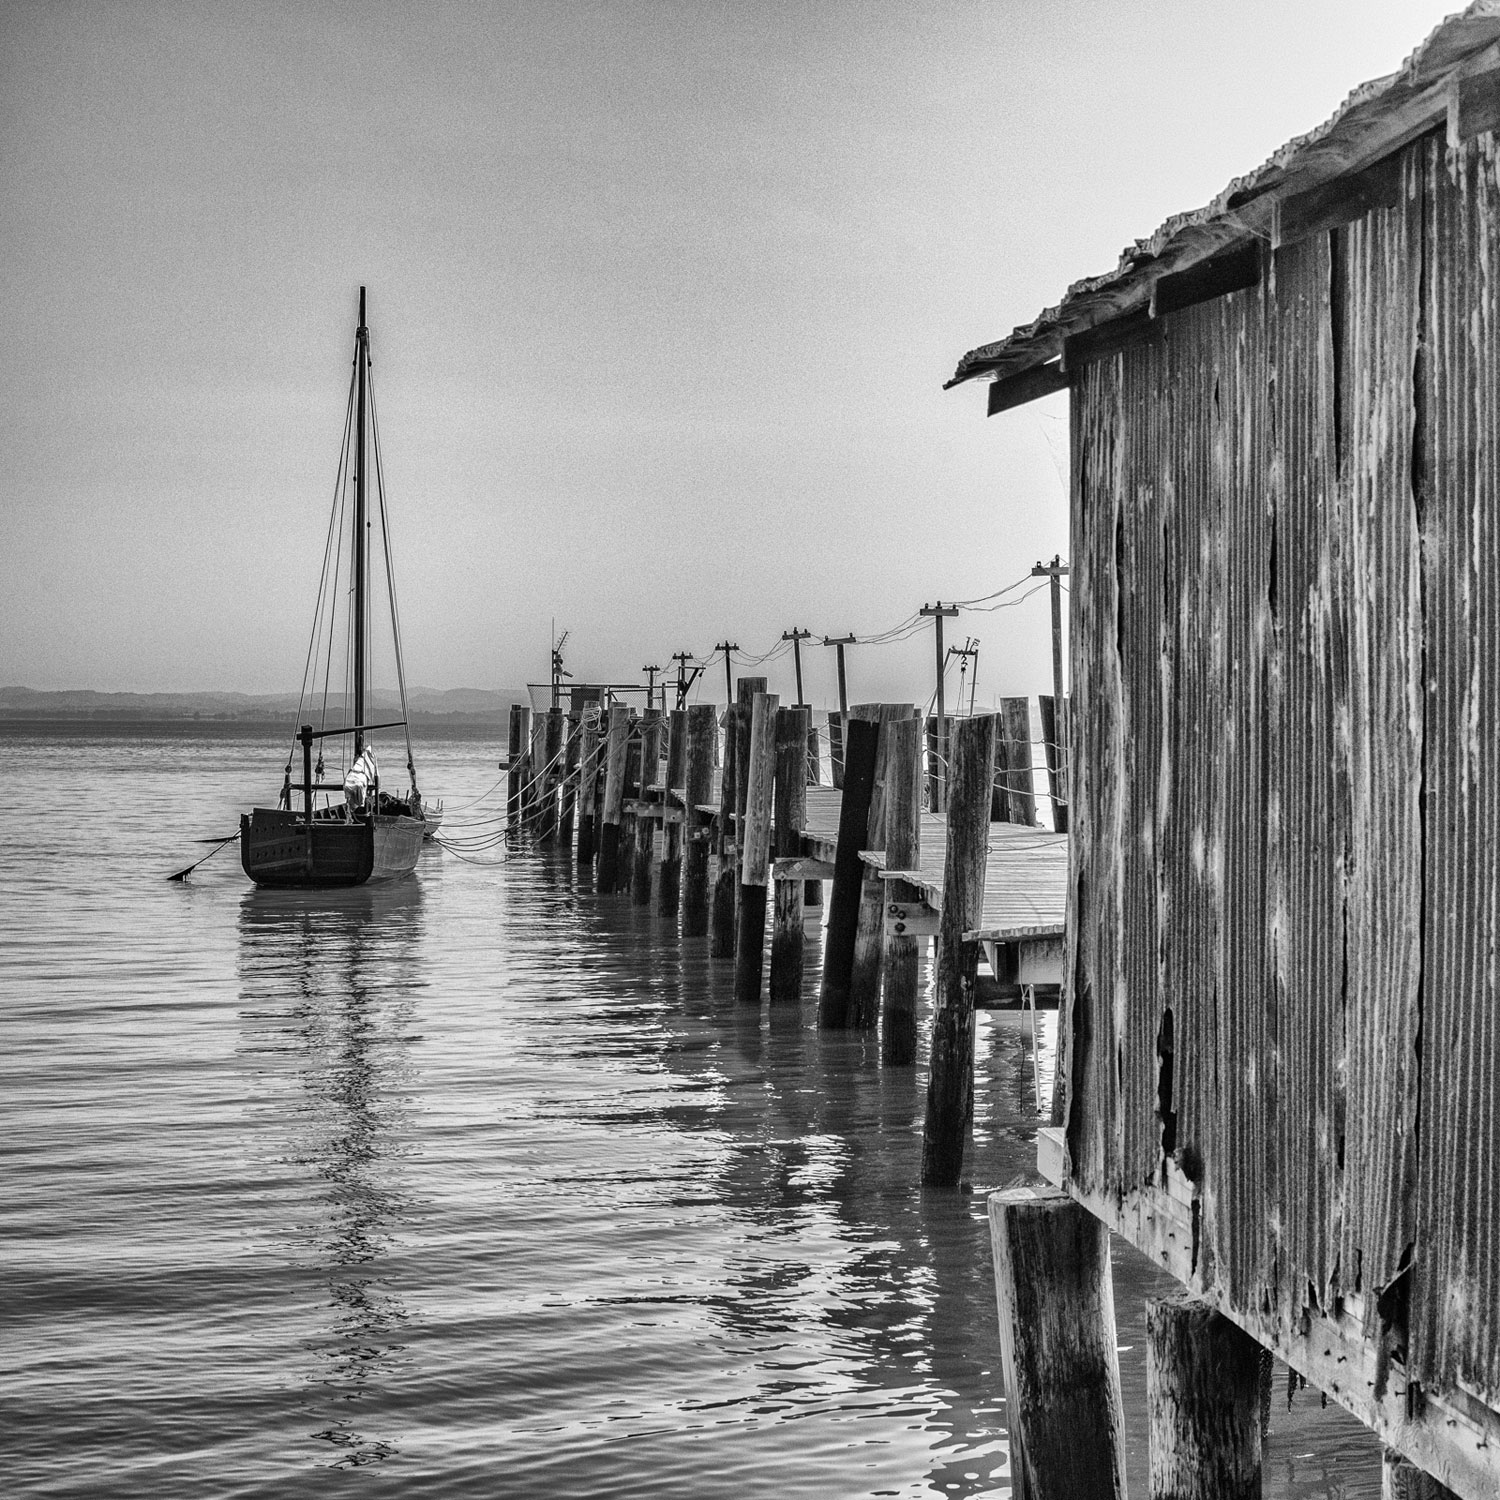 An old wooden boat tied to a pier